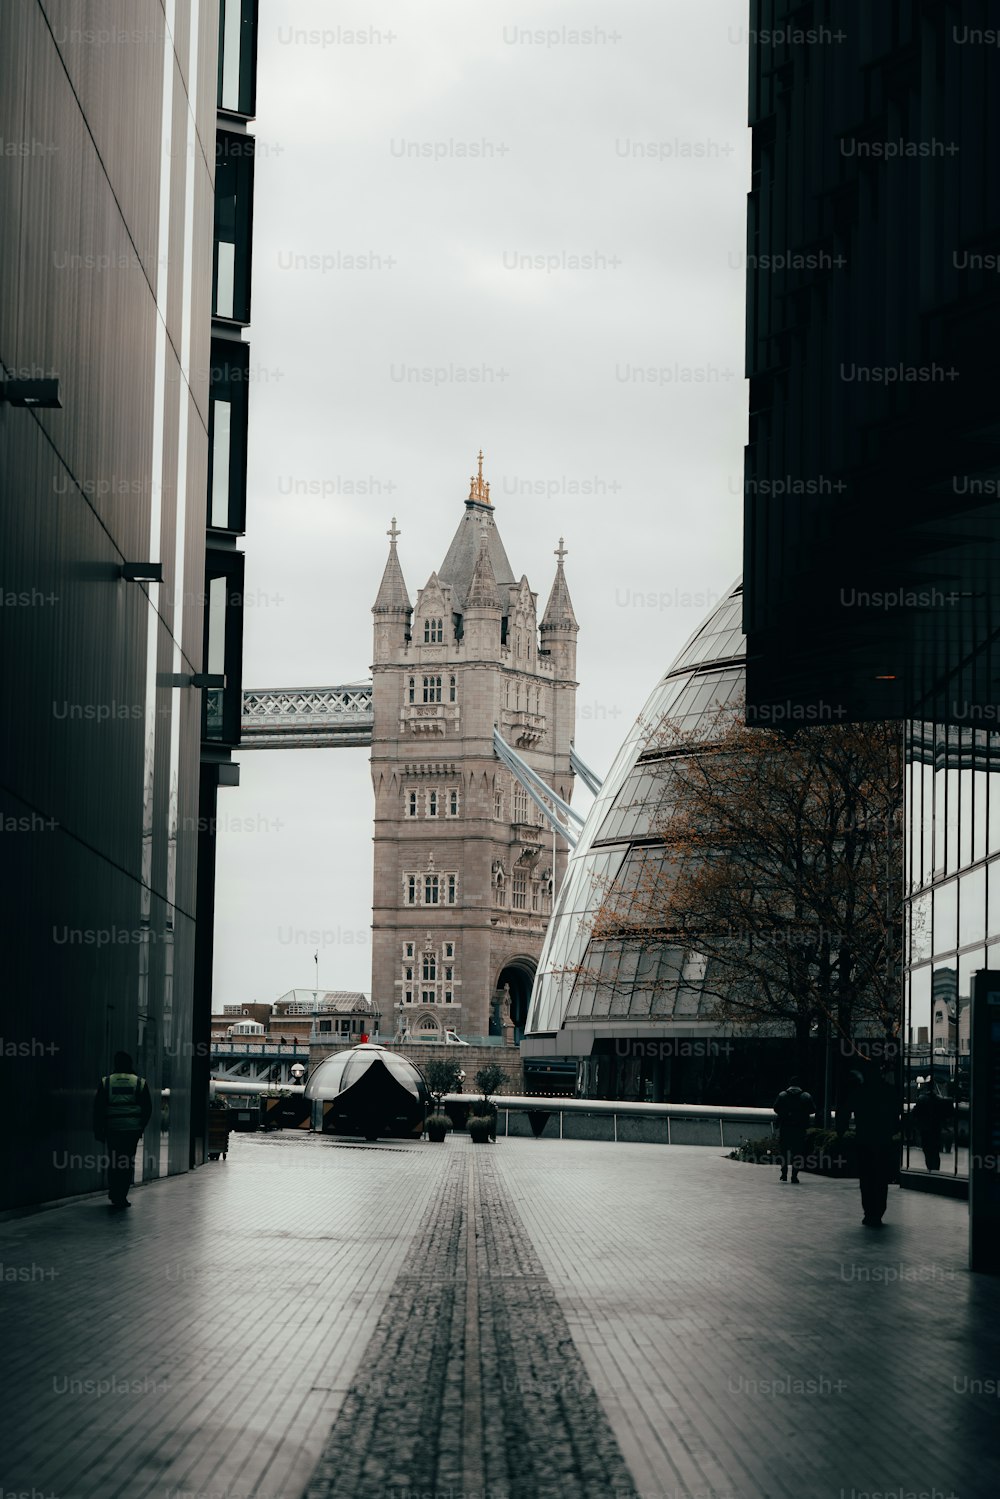 a view of the tower bridge from a walkway